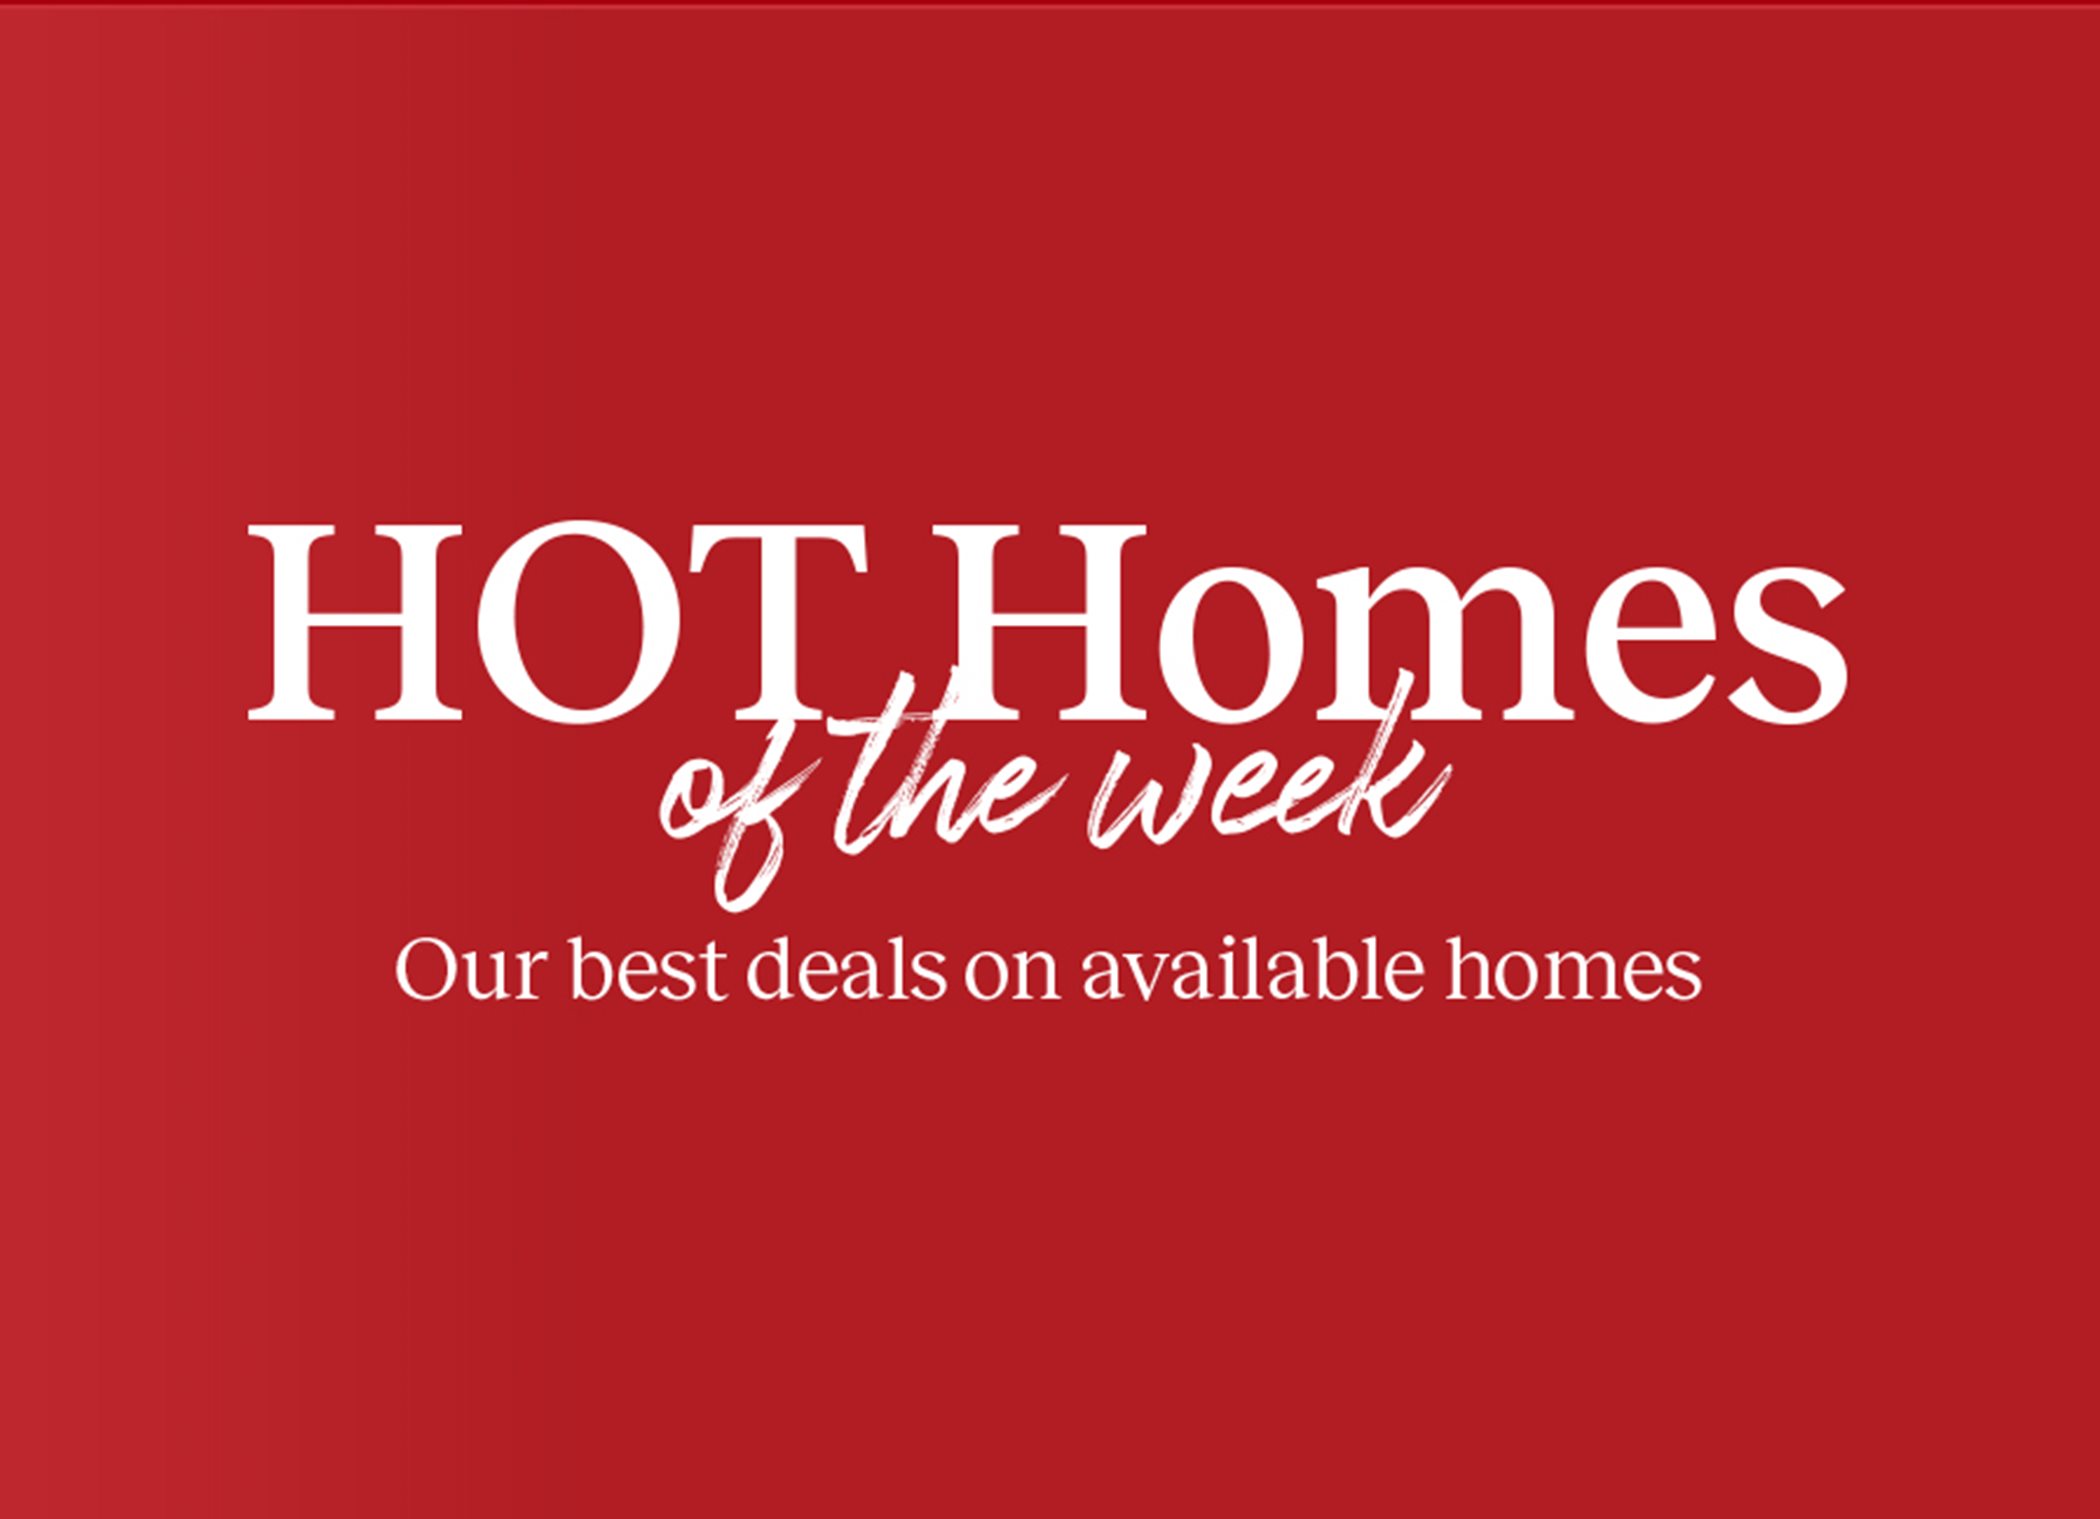 Hot Homes of the Week